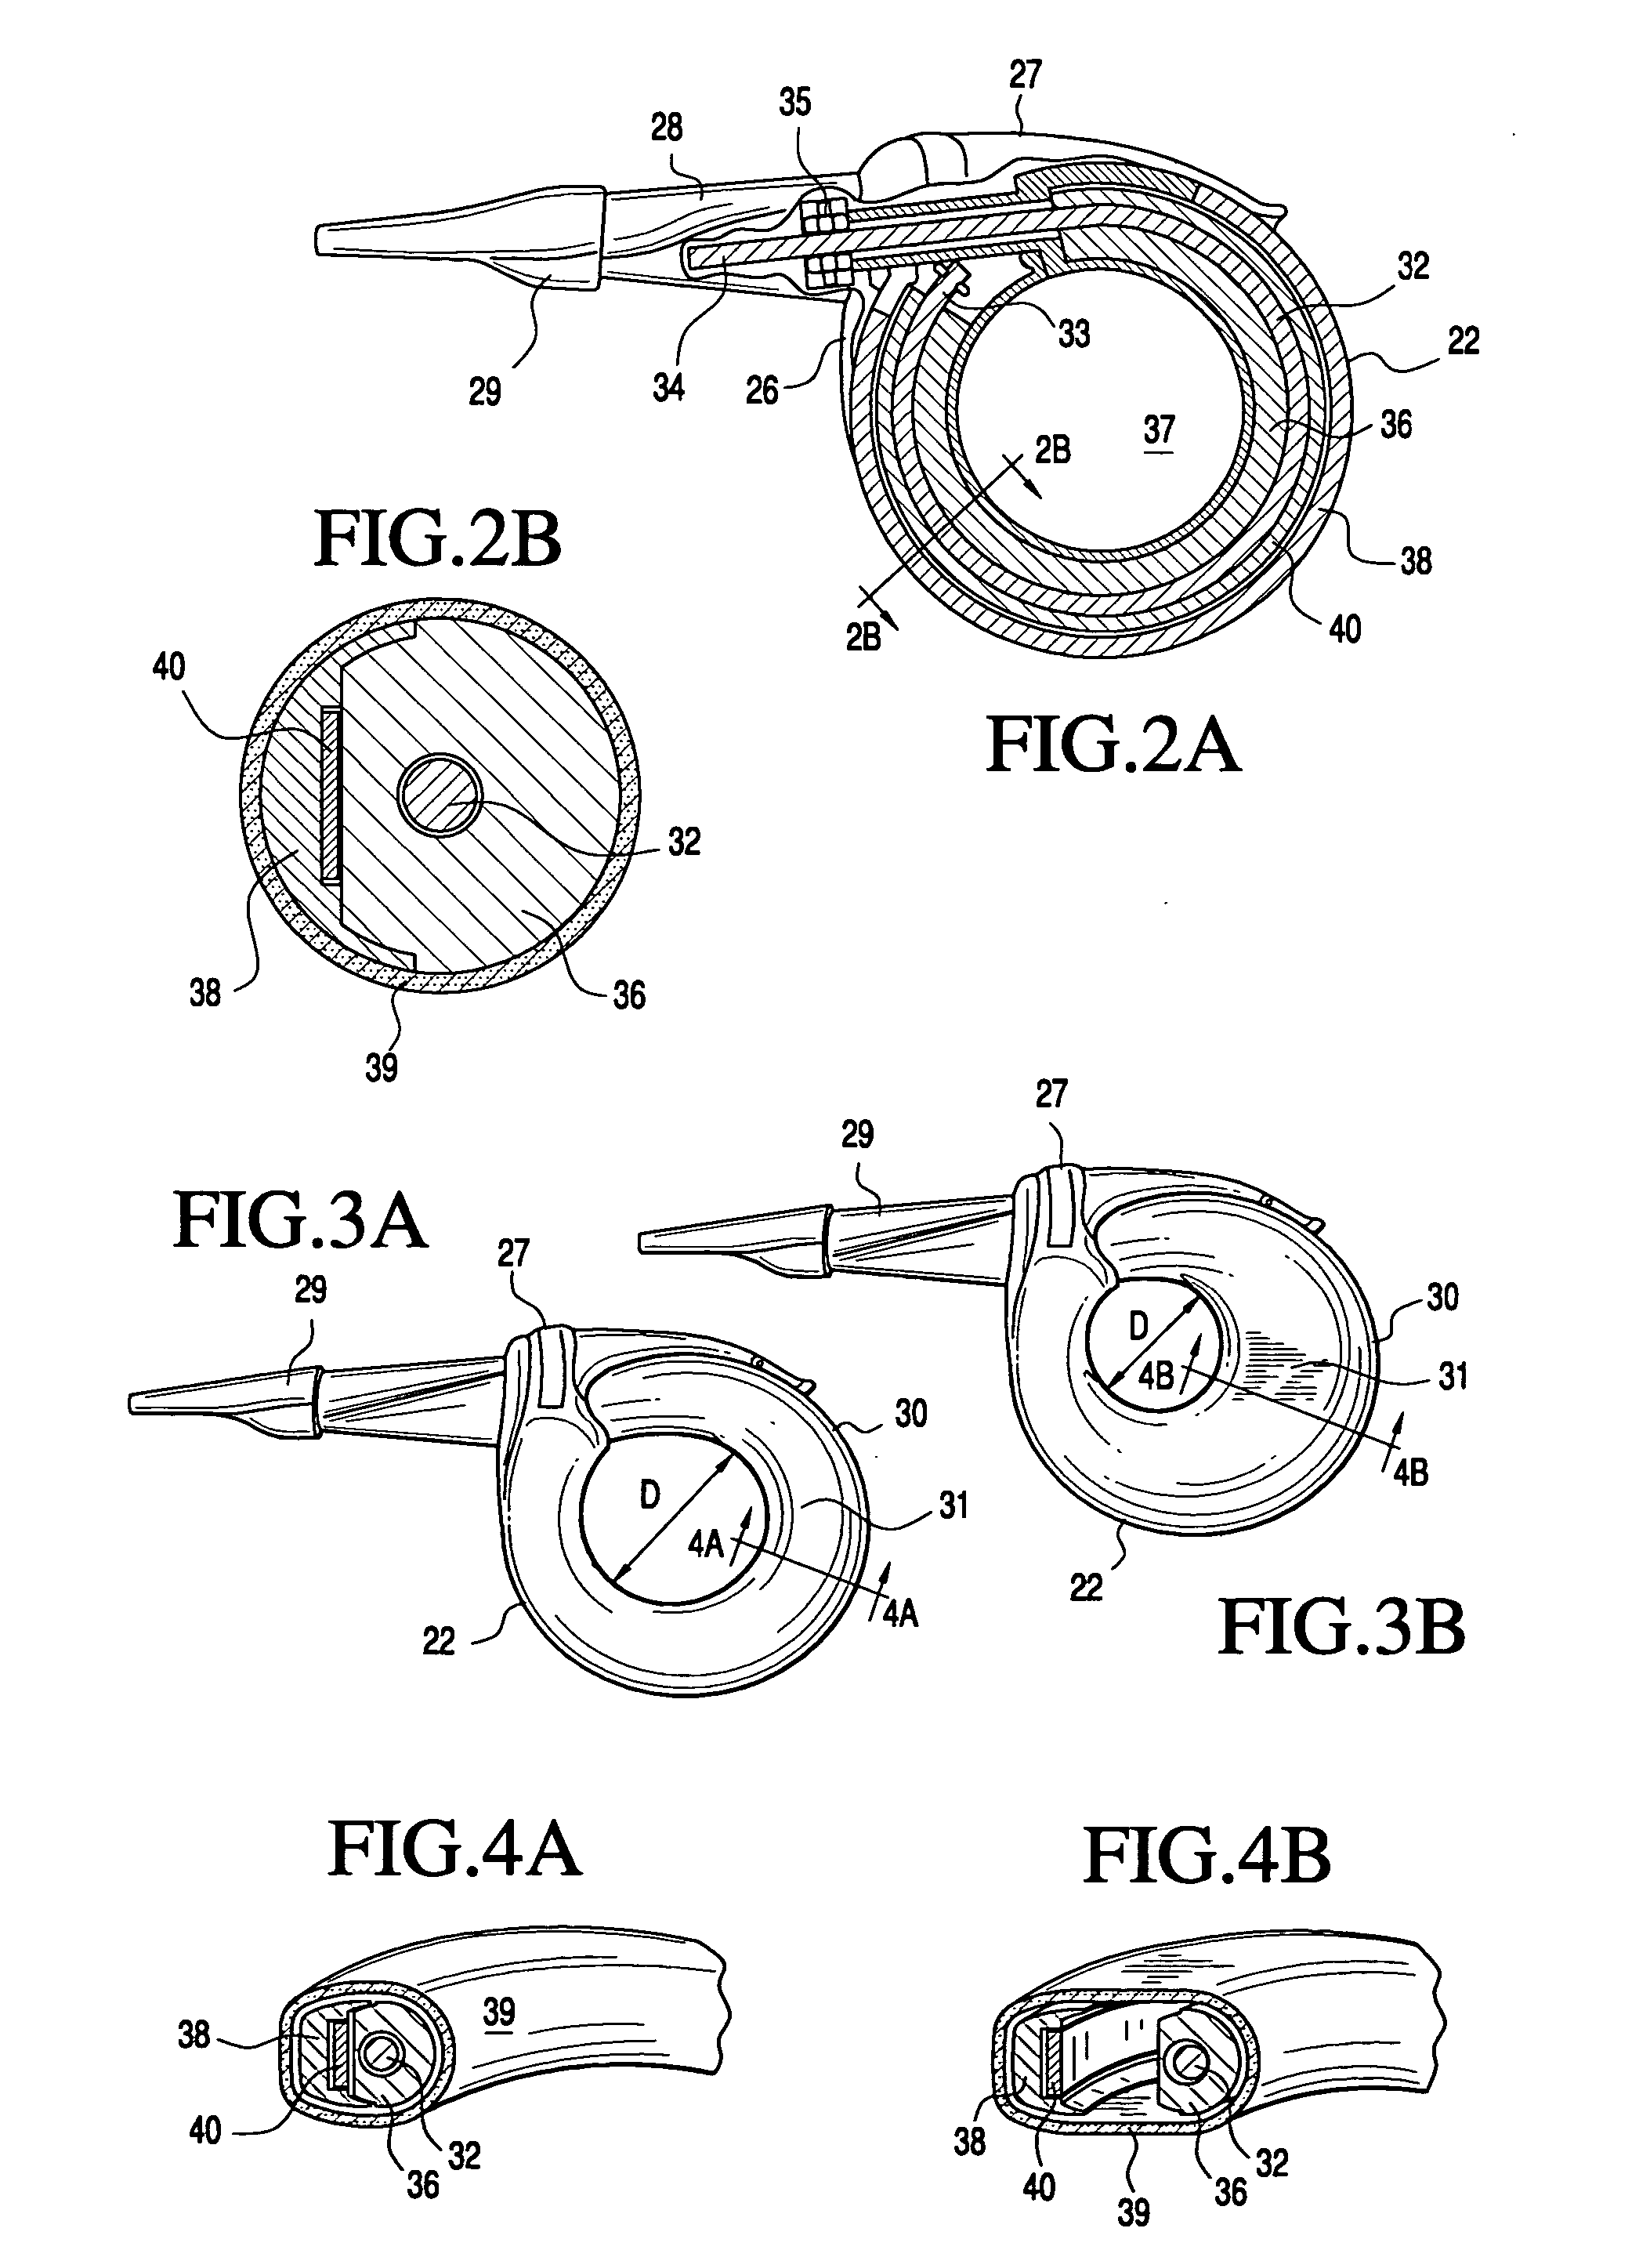 Telemetrically controlled band for regulating functioning of a body organ or duct, and methods of making, implantation and use